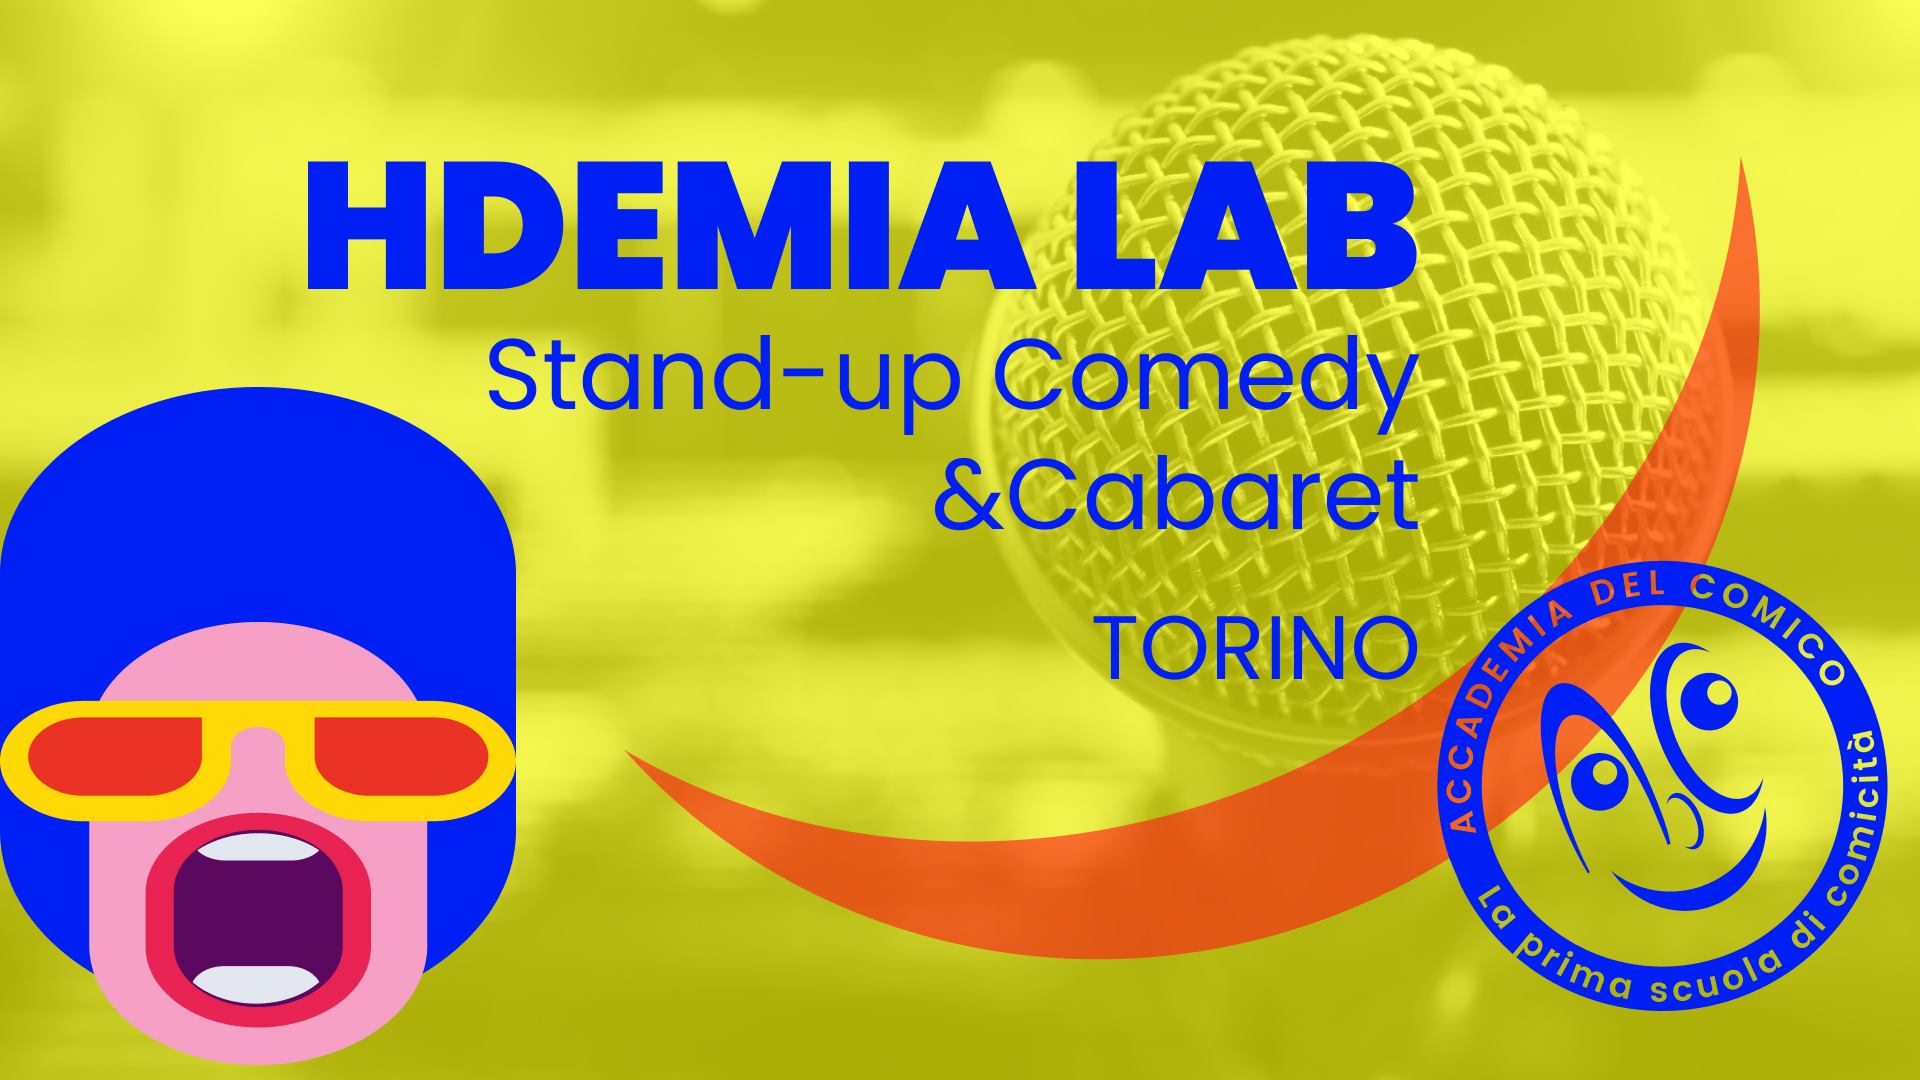 Hdemia Lab - Stand-up Comedy & Cabaret